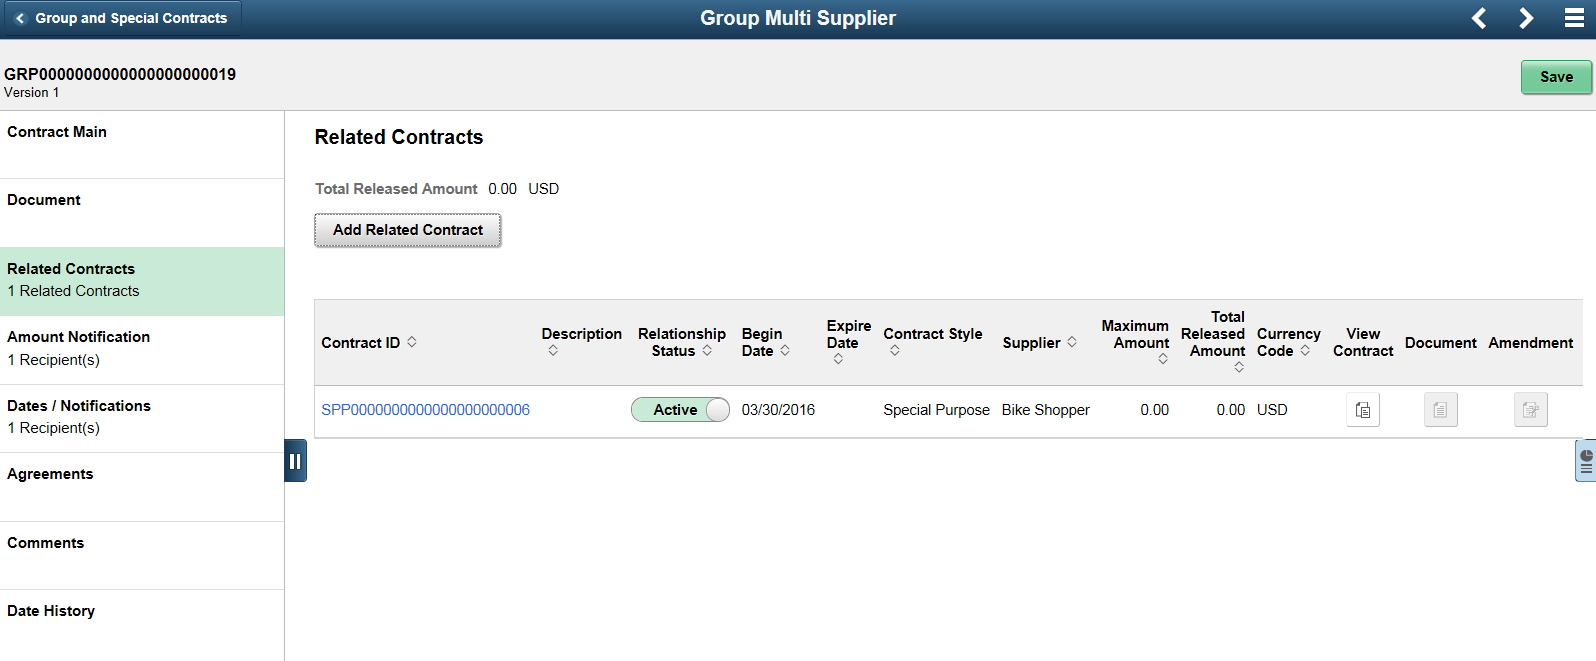 Example of Group Multi Supplier - Related Contracts